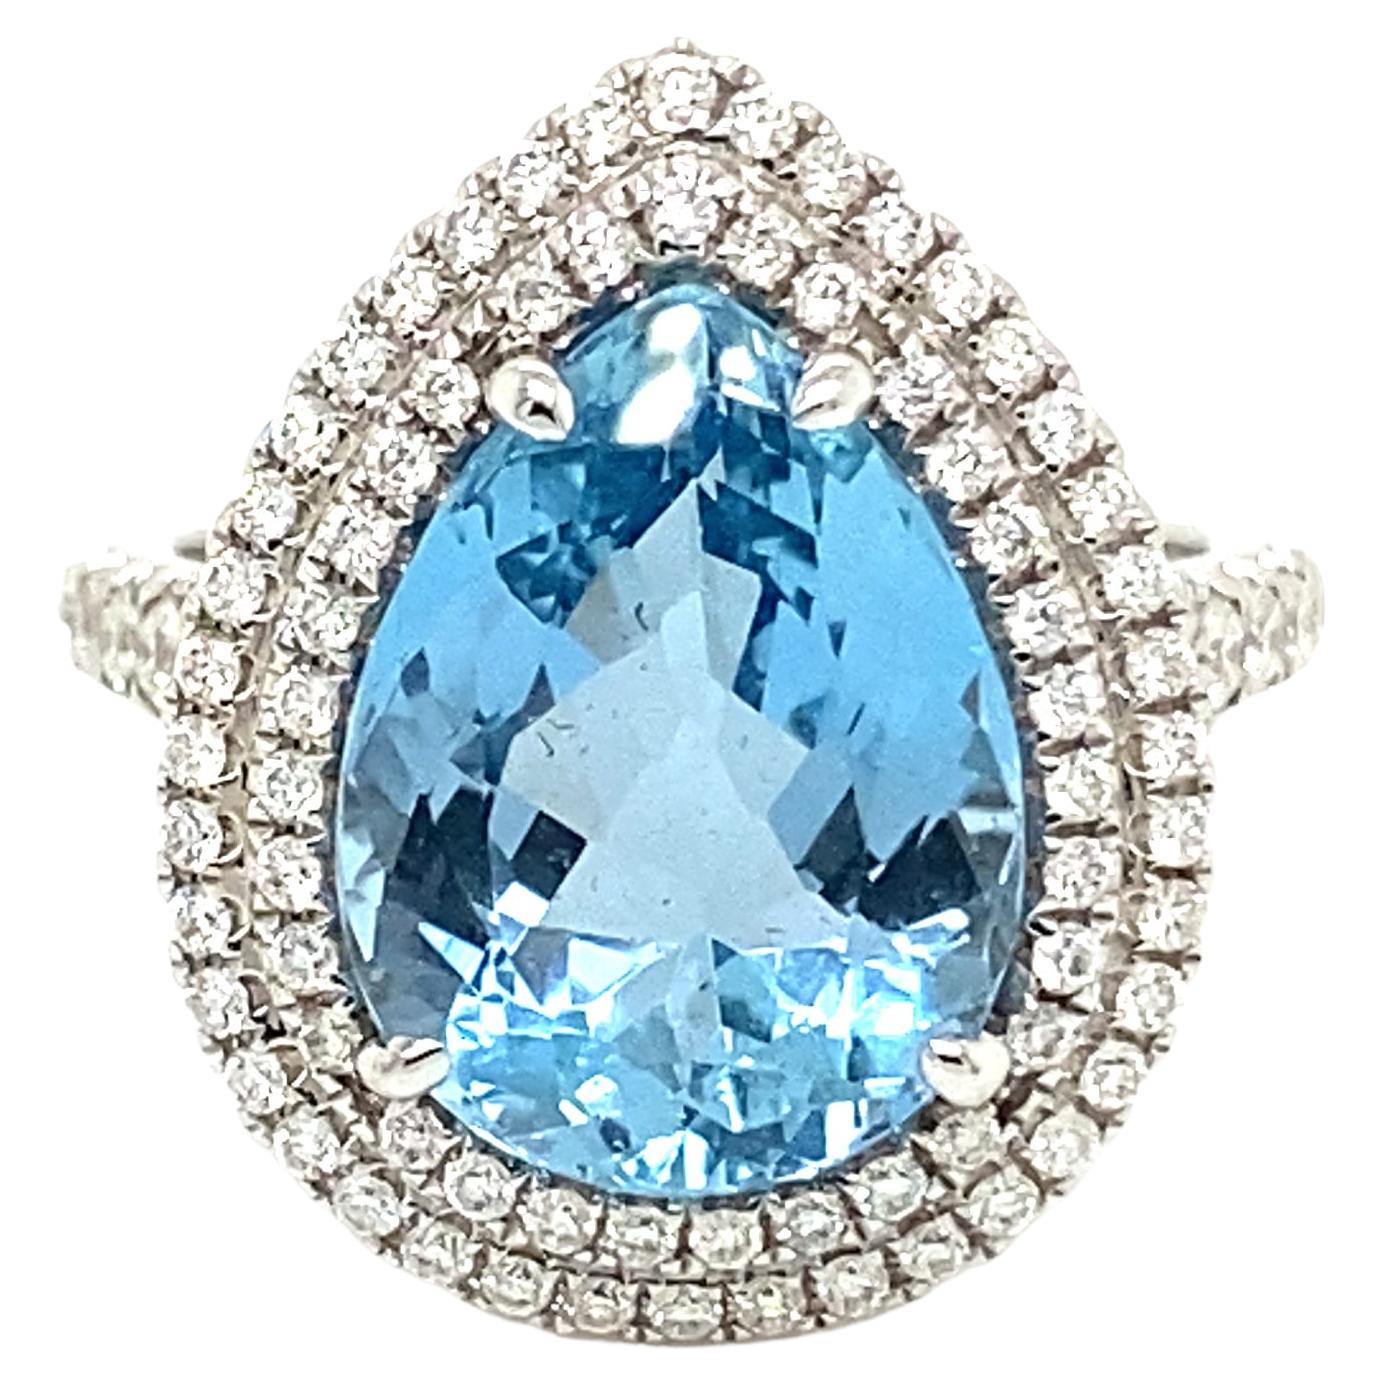 This stunning cocktail ring showcases a beautiful 4.82 Carat Pear Shape Aquamarine with a Double Diamond Halo on a Diamond Shank. 
This ring is set in 18k white gold.
Total Diamond Weight = 0.65 Carats. Ring Size is 6 1/2.